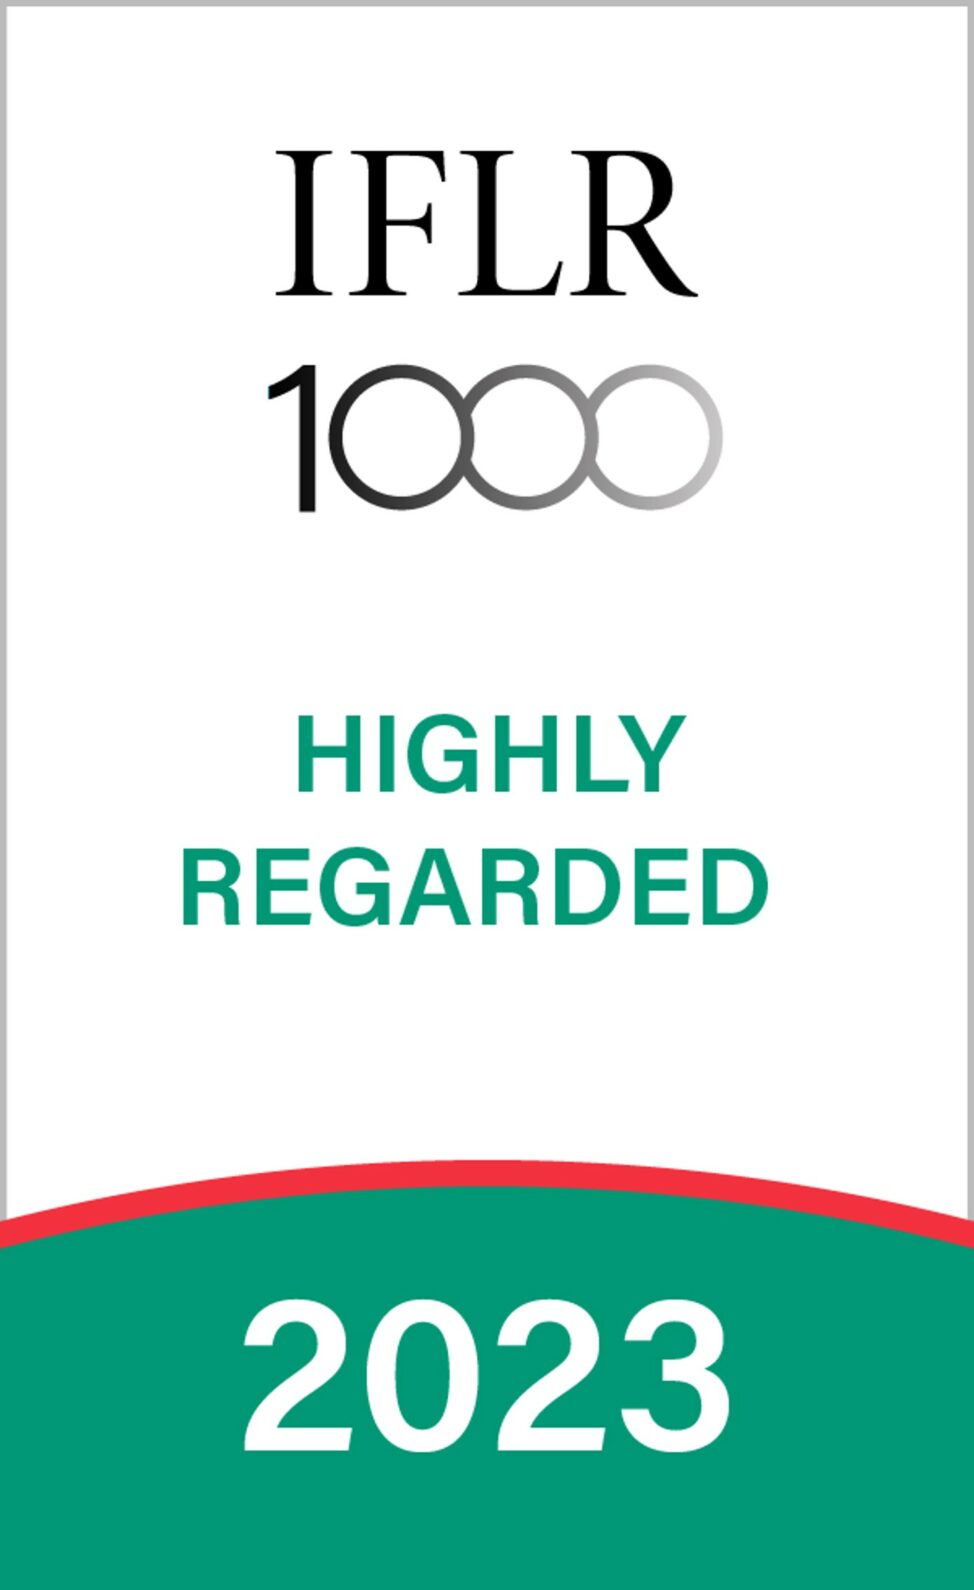 We are pleased to announce that Andrew Muscat, Michael Psaila and Katya Tua have been once again recognised as highly regarded lawyers by the IFLR1000.